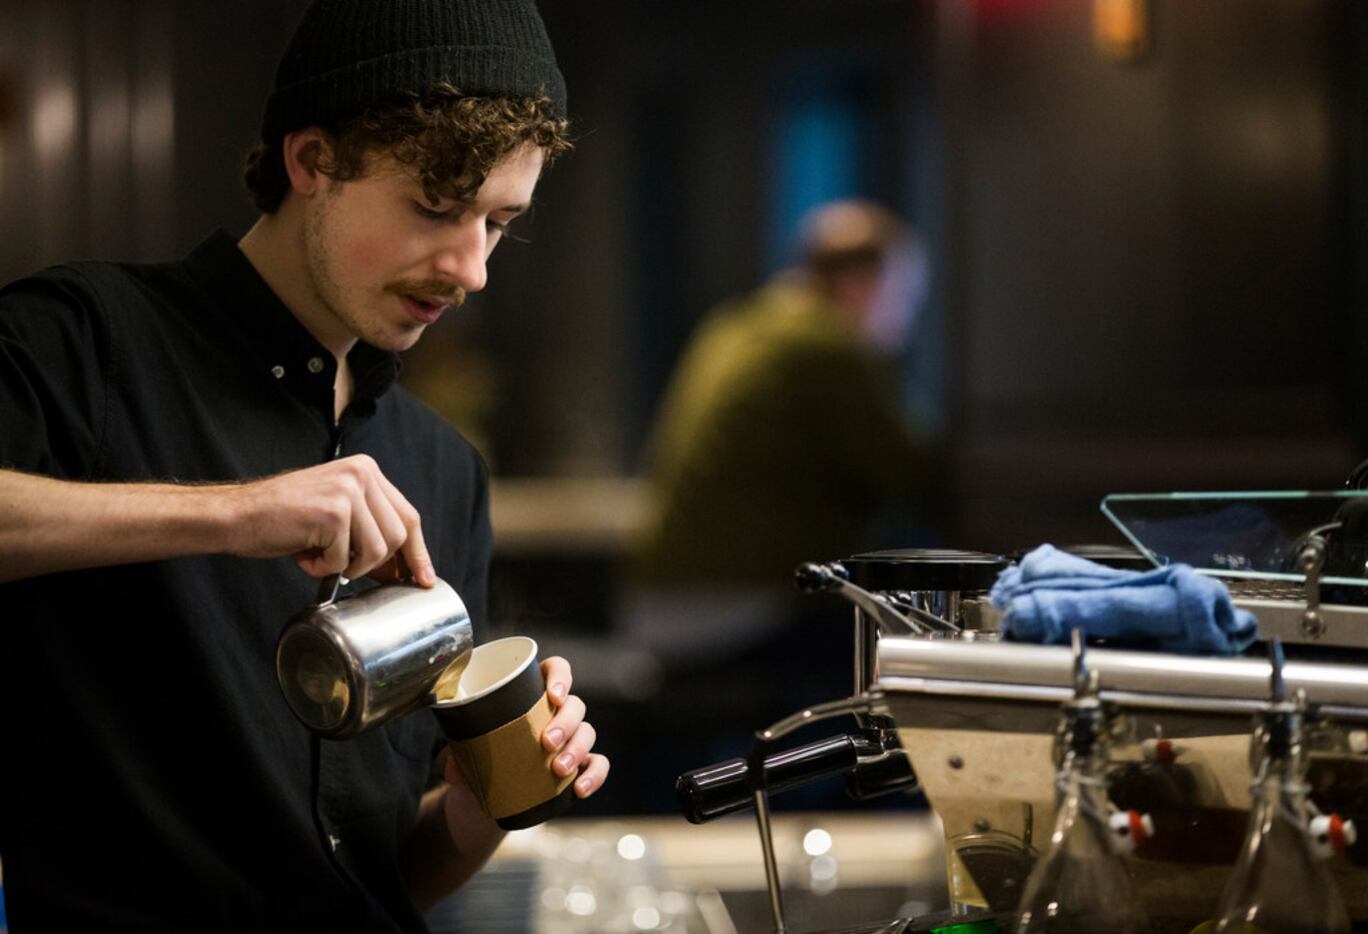 Barista Jeremy Taylor makes a coffee drink at Otto's coffee shop.